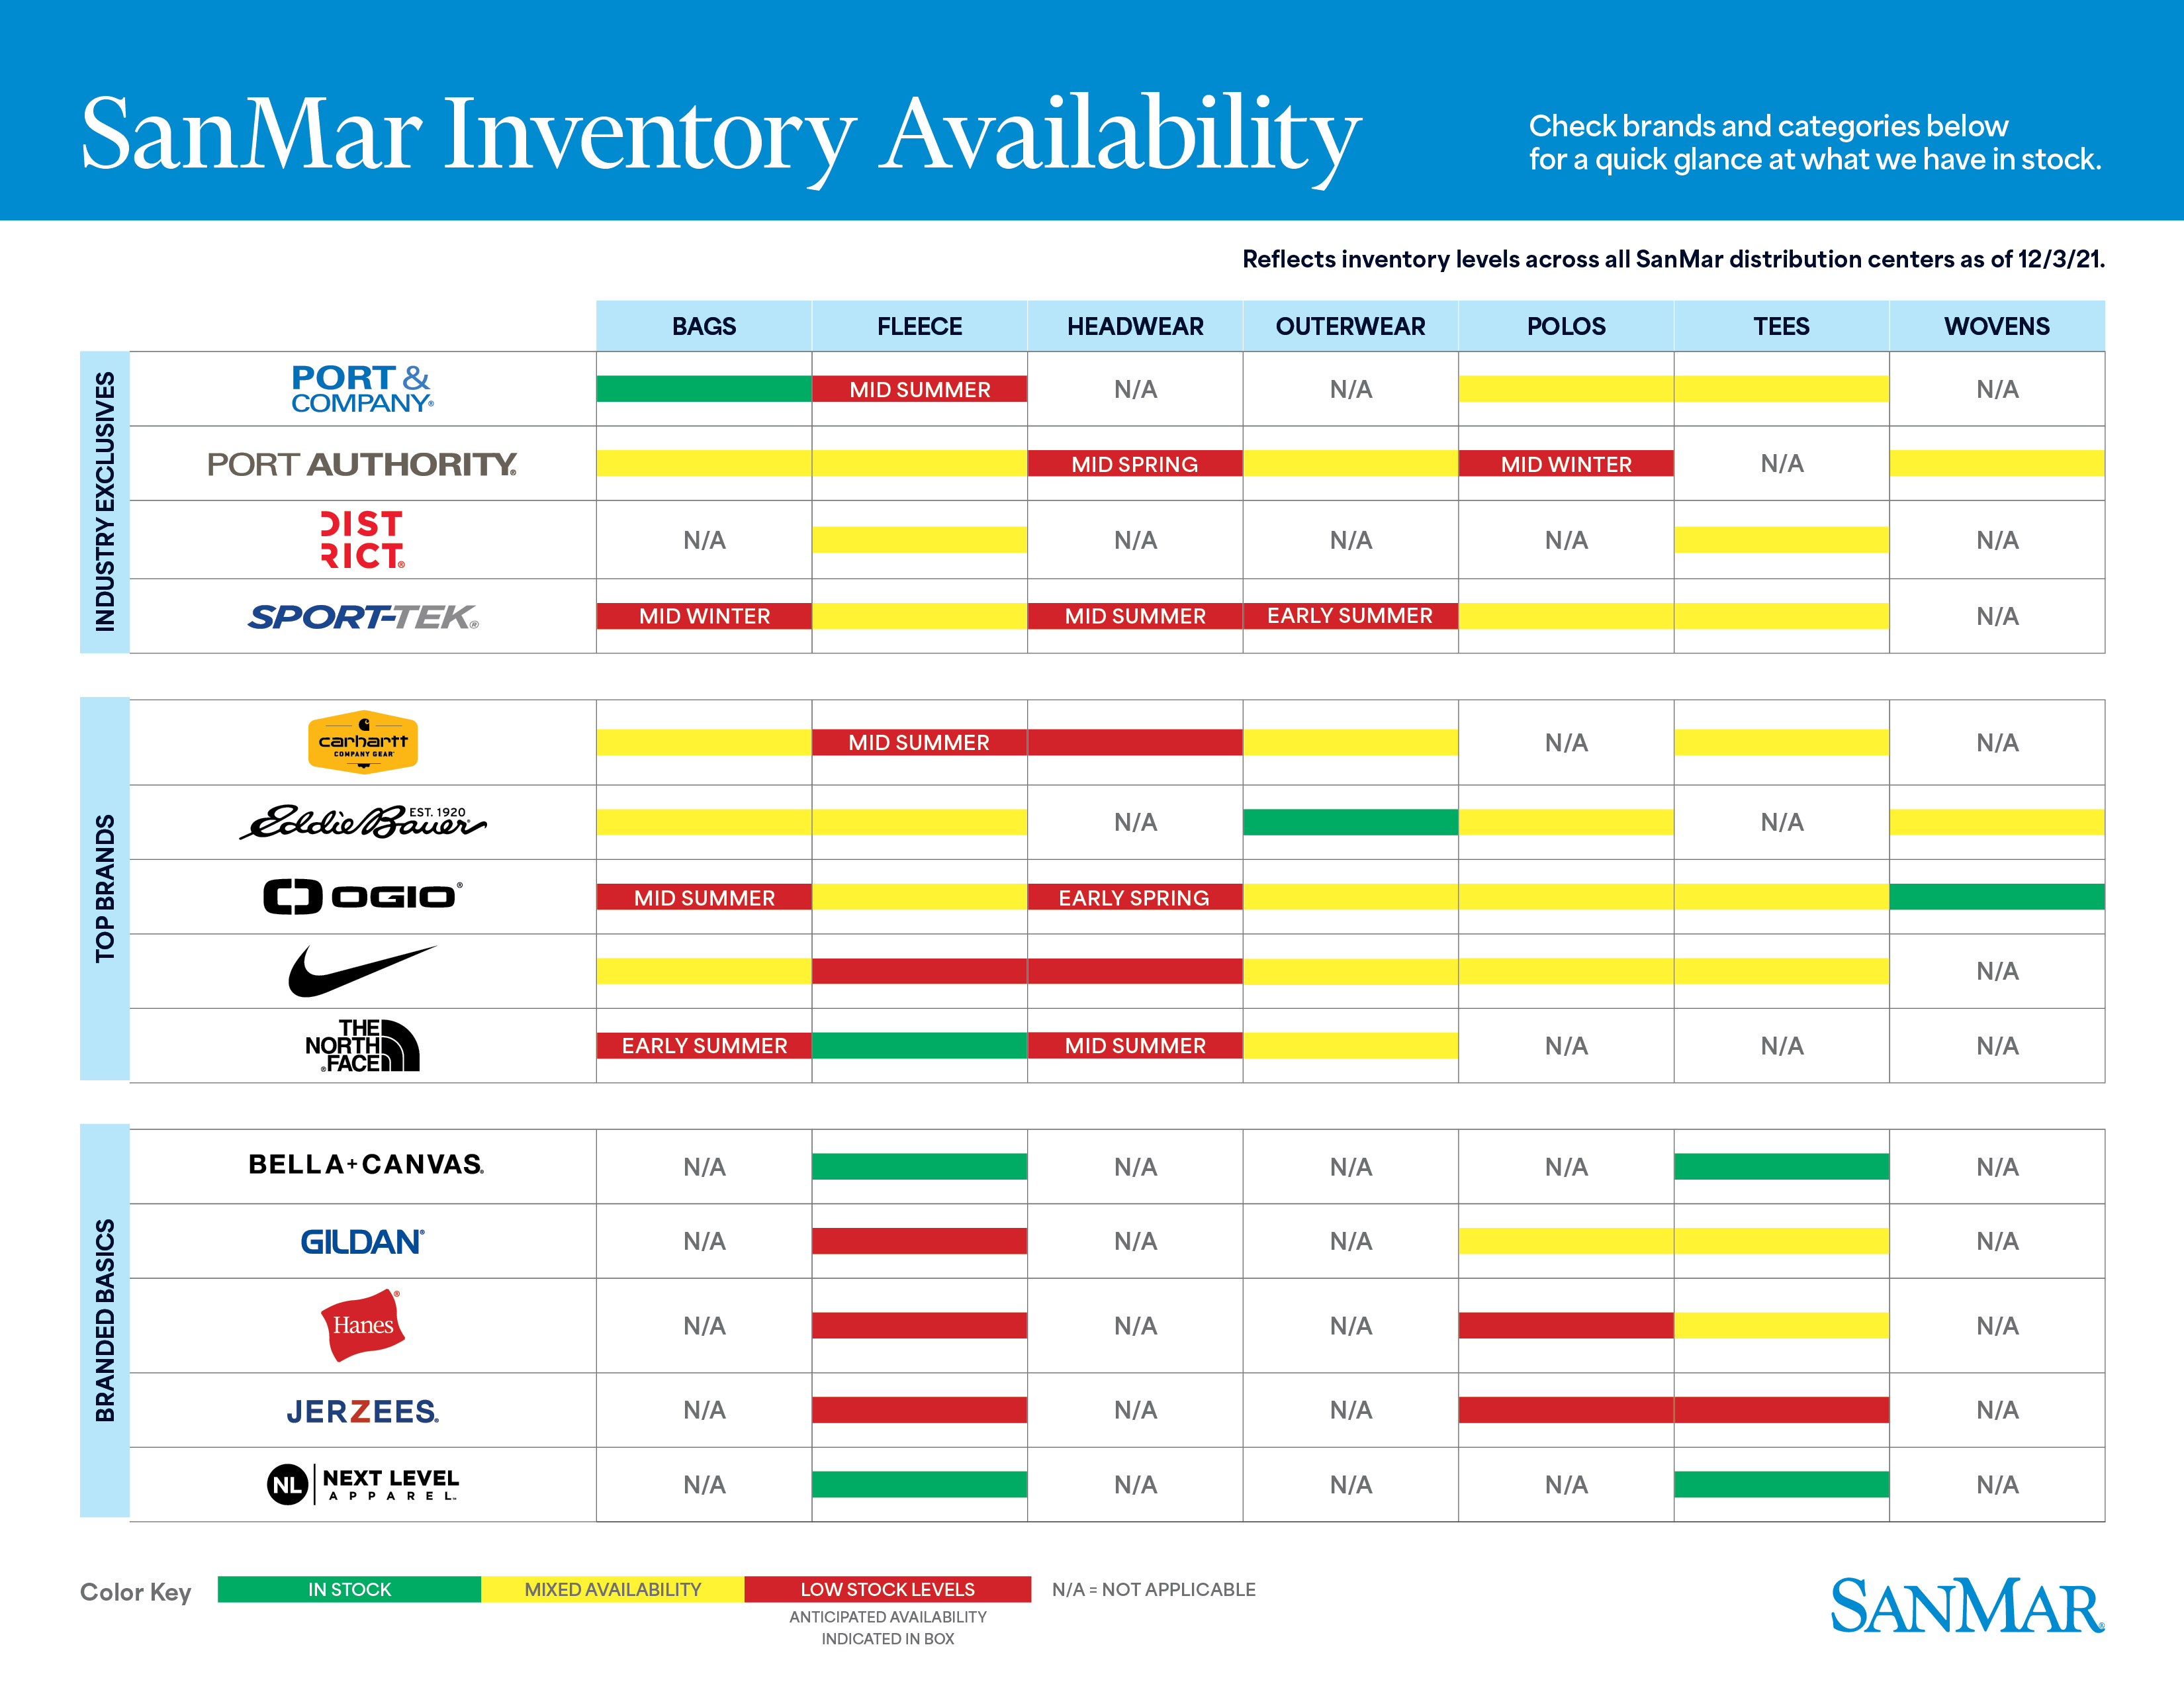 Inventory Availability